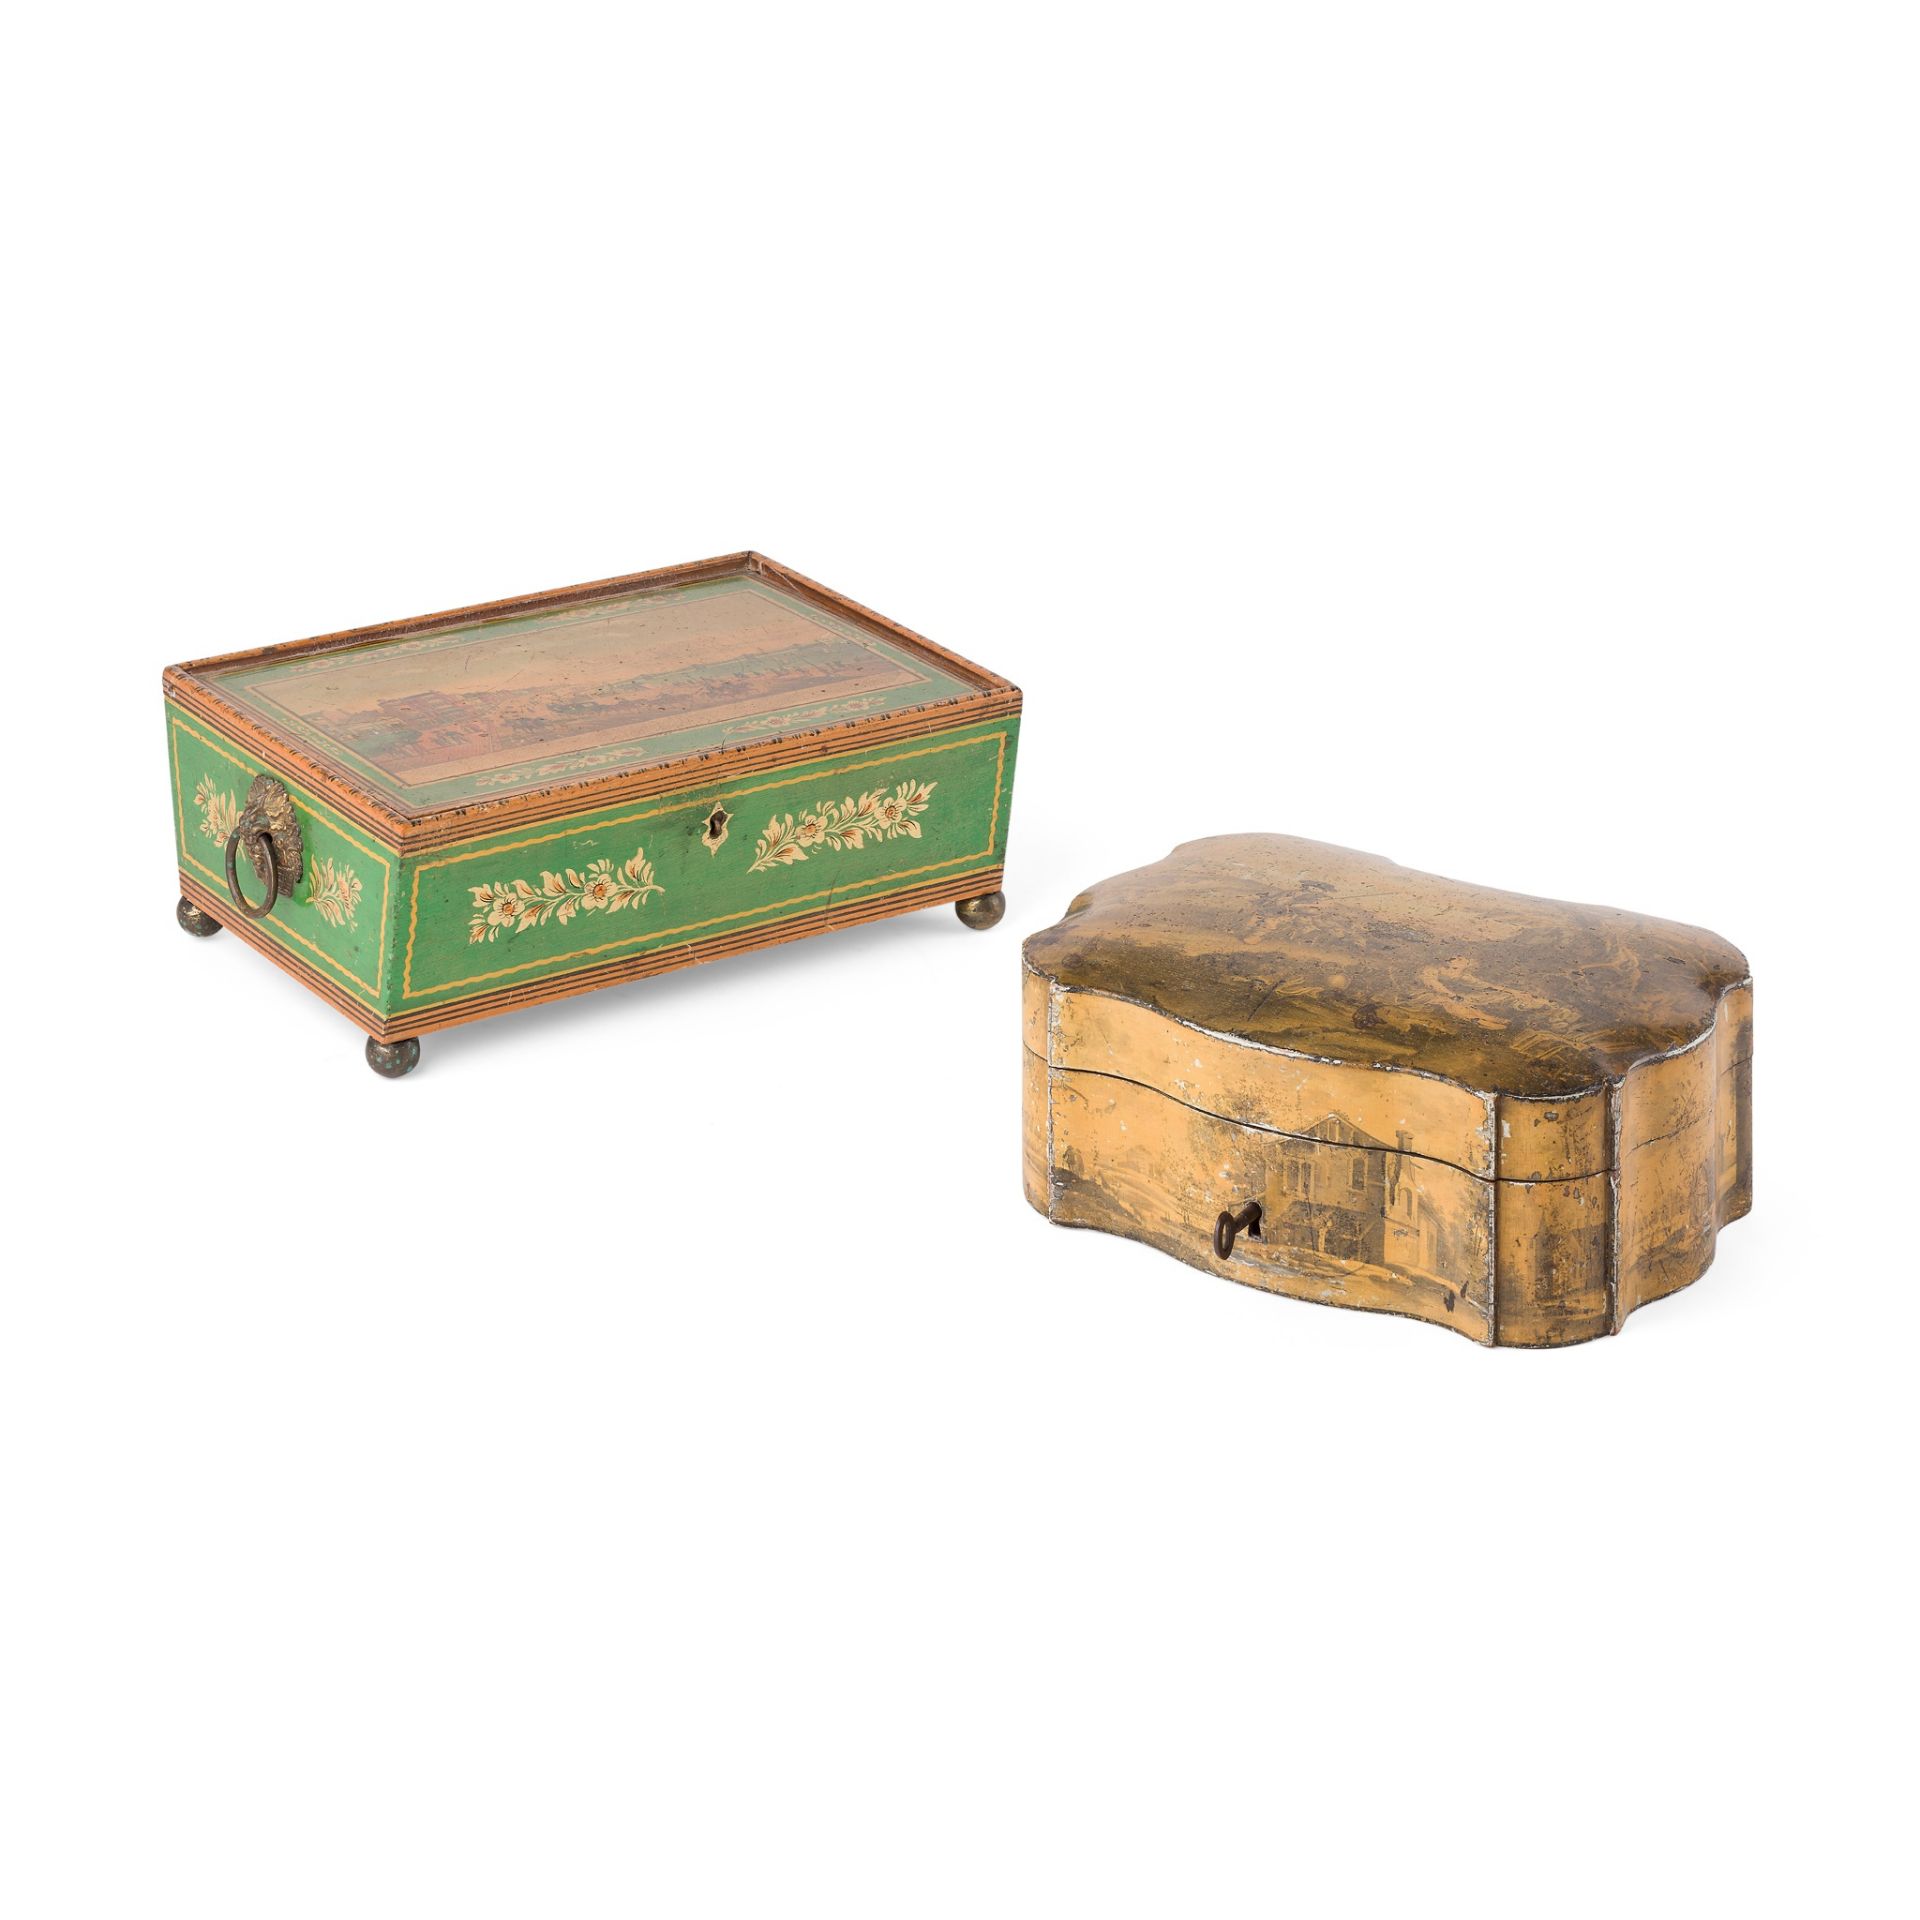 TWO PAINTED/LACQUER PRINTED WOOD BOXES EARLY 19TH CENTURY